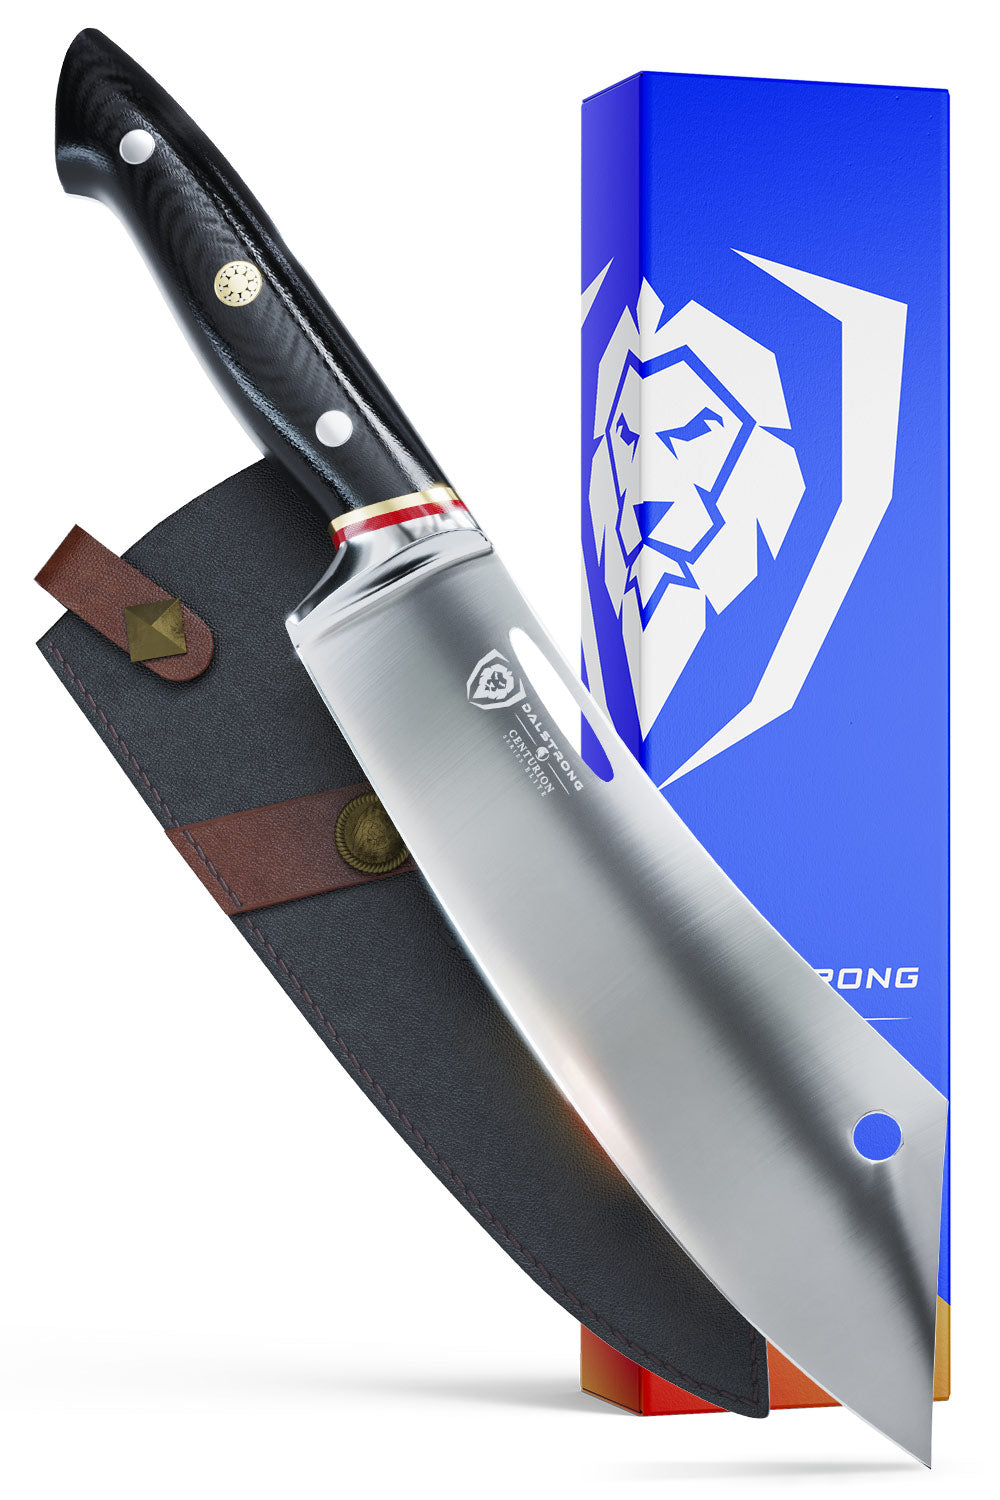 Dalstrong centurion series 8 inch crixus cleaver knife in front of it's premium packaging.